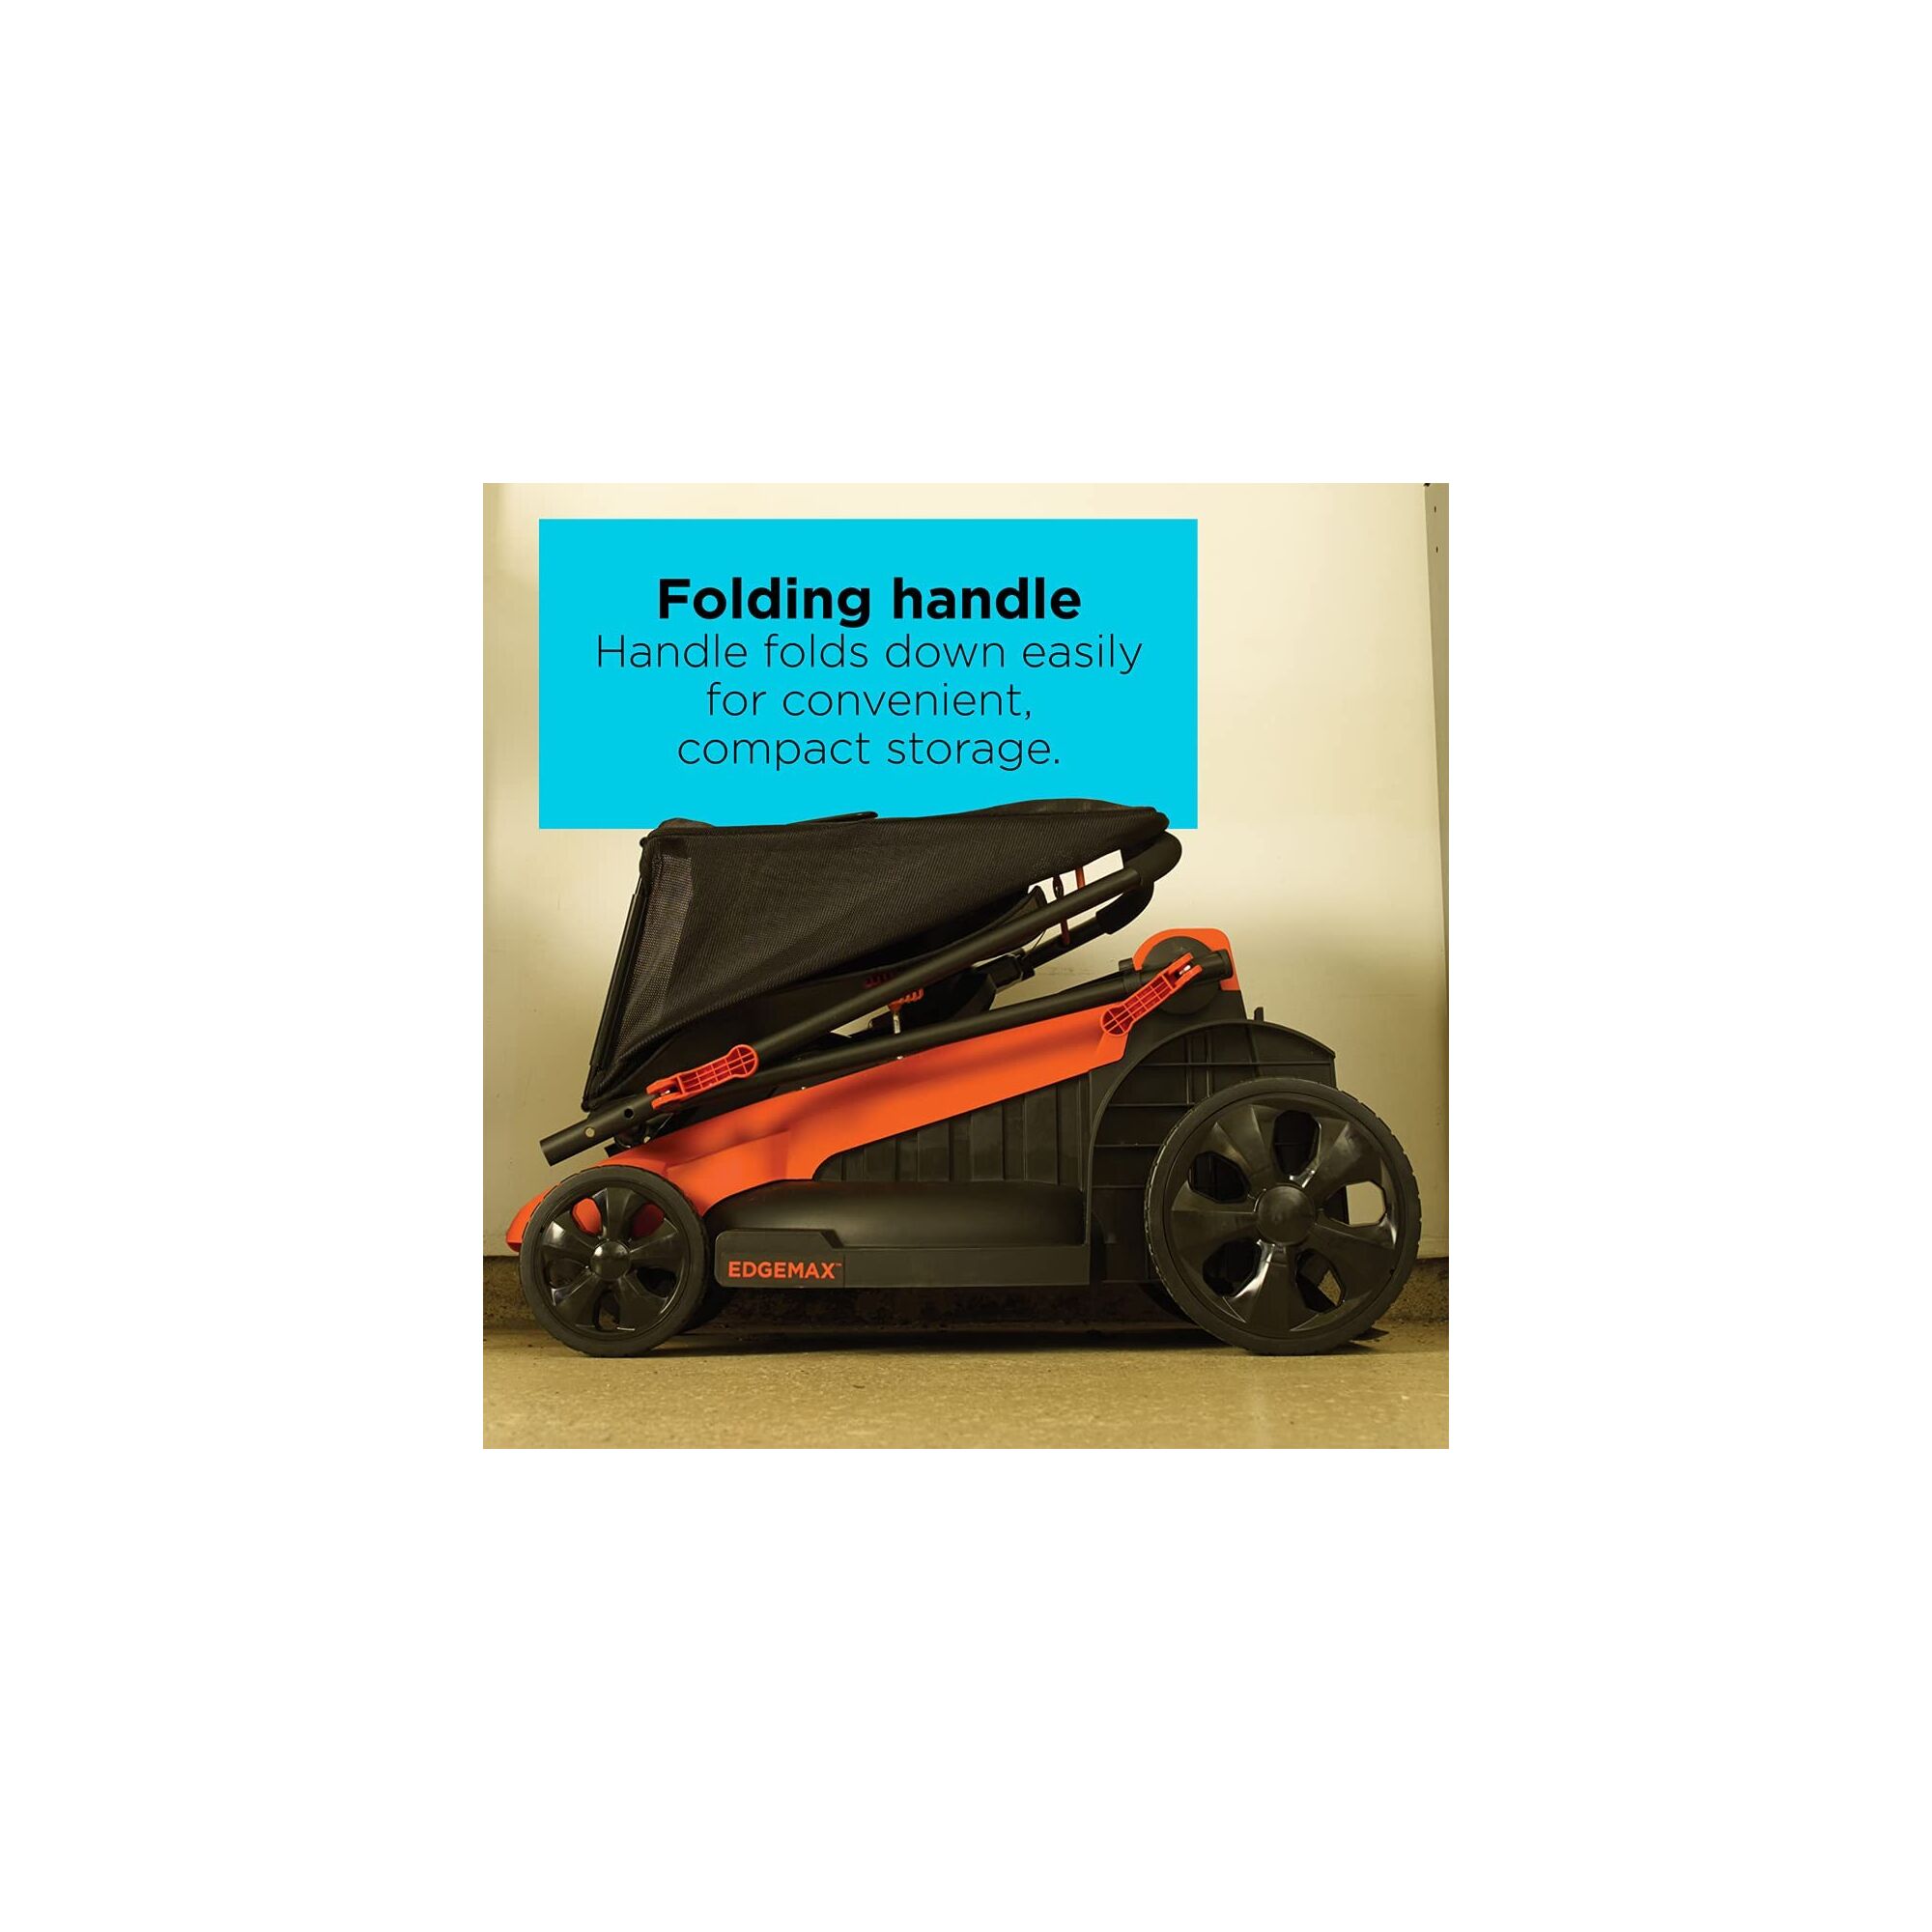 Demonstration of handle folding feature on the BLACK+DECKER lawn mower